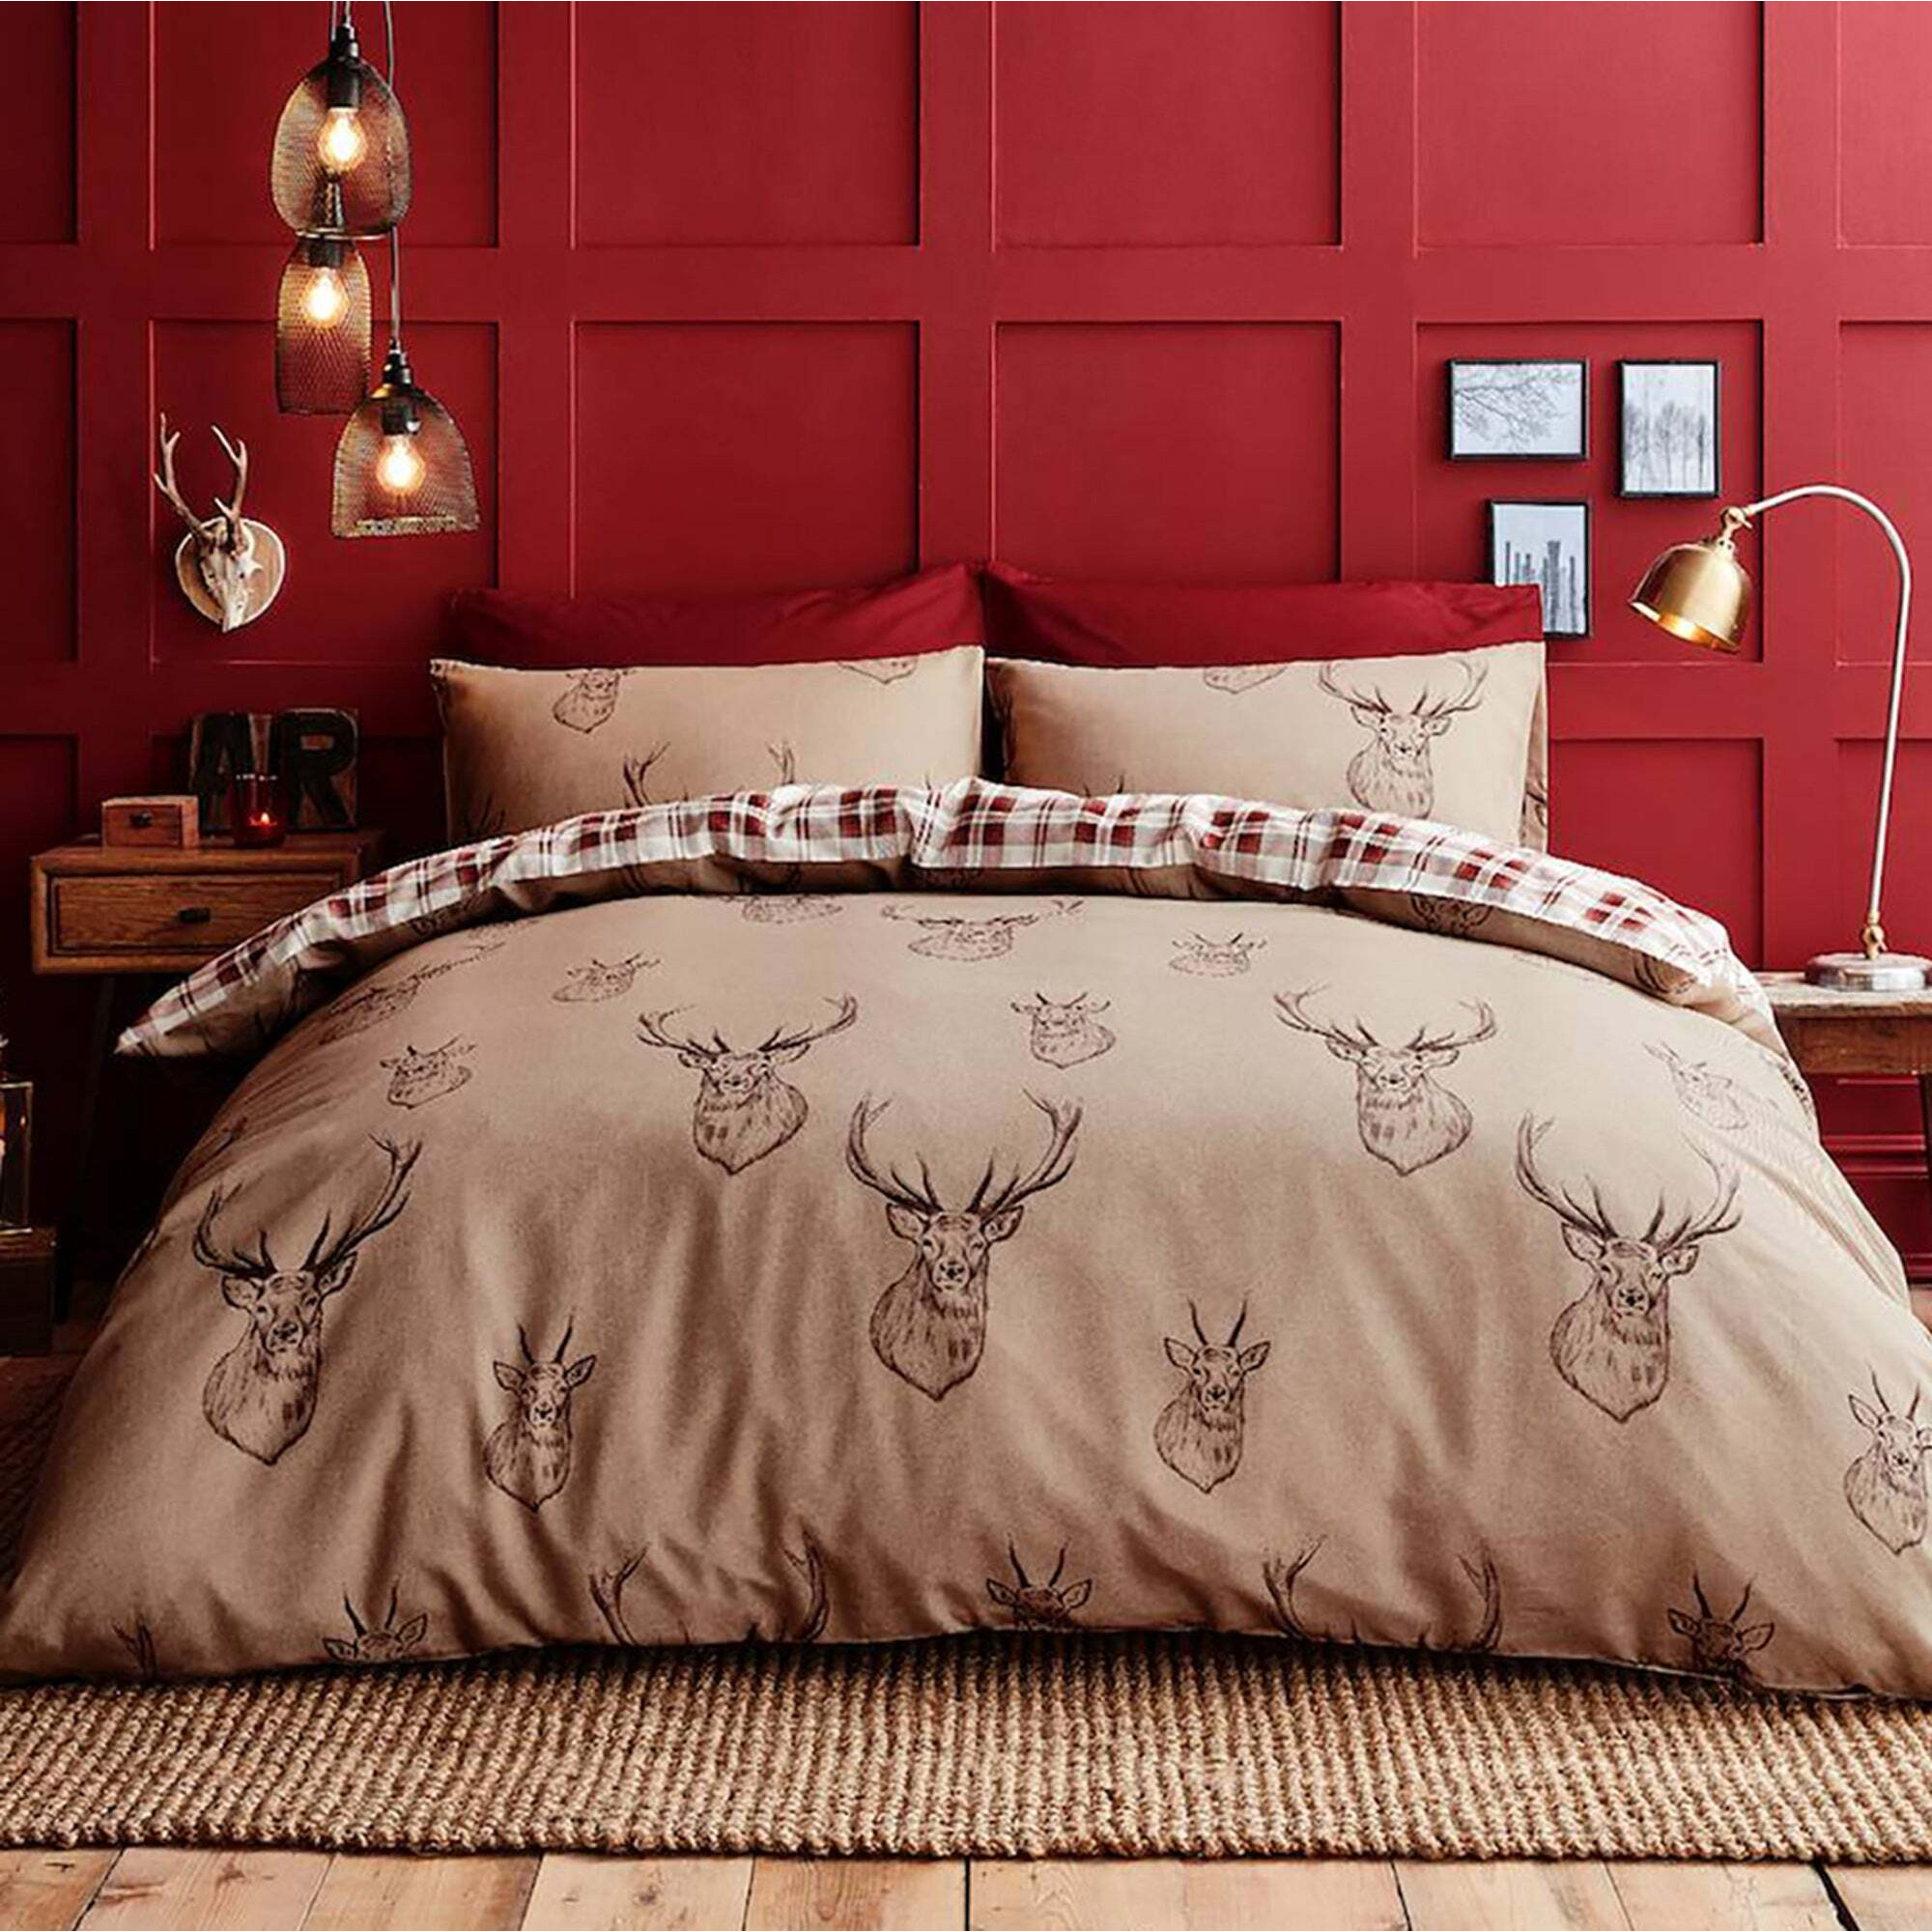 Stag Natural Duvet Cover and Pillowcase Set Beige/Red